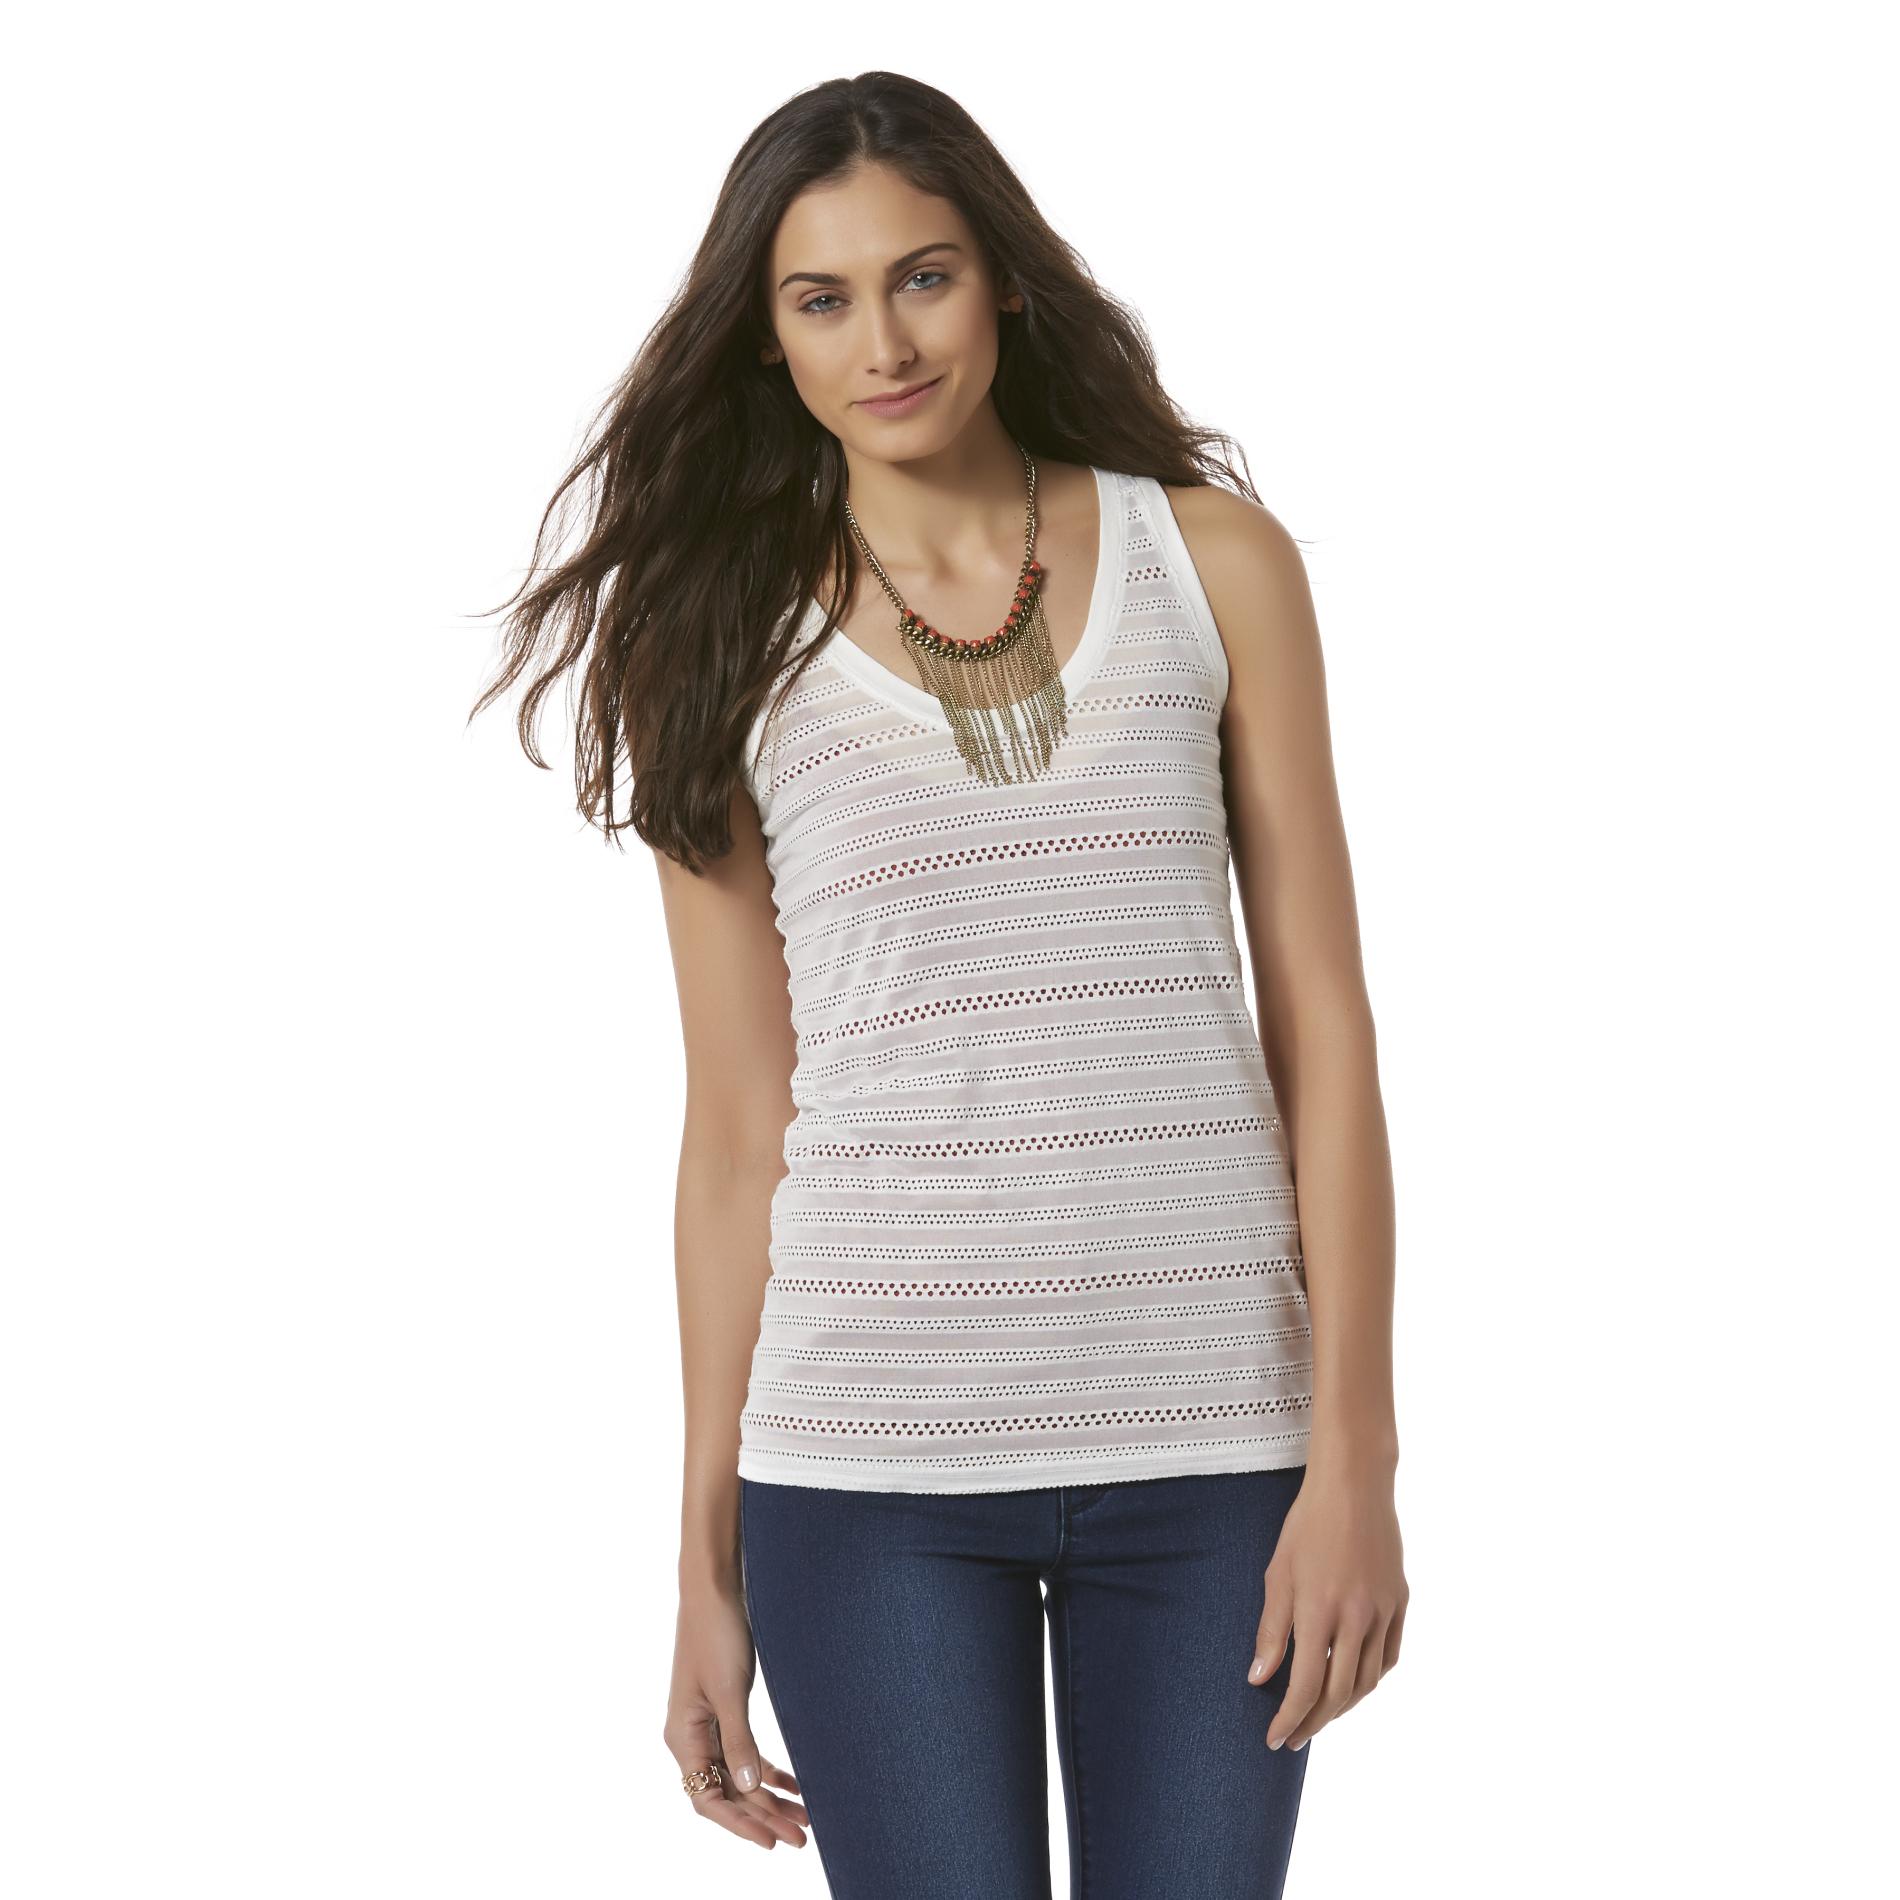 Simply Styled Women's Pointelle Tank Top - Striped